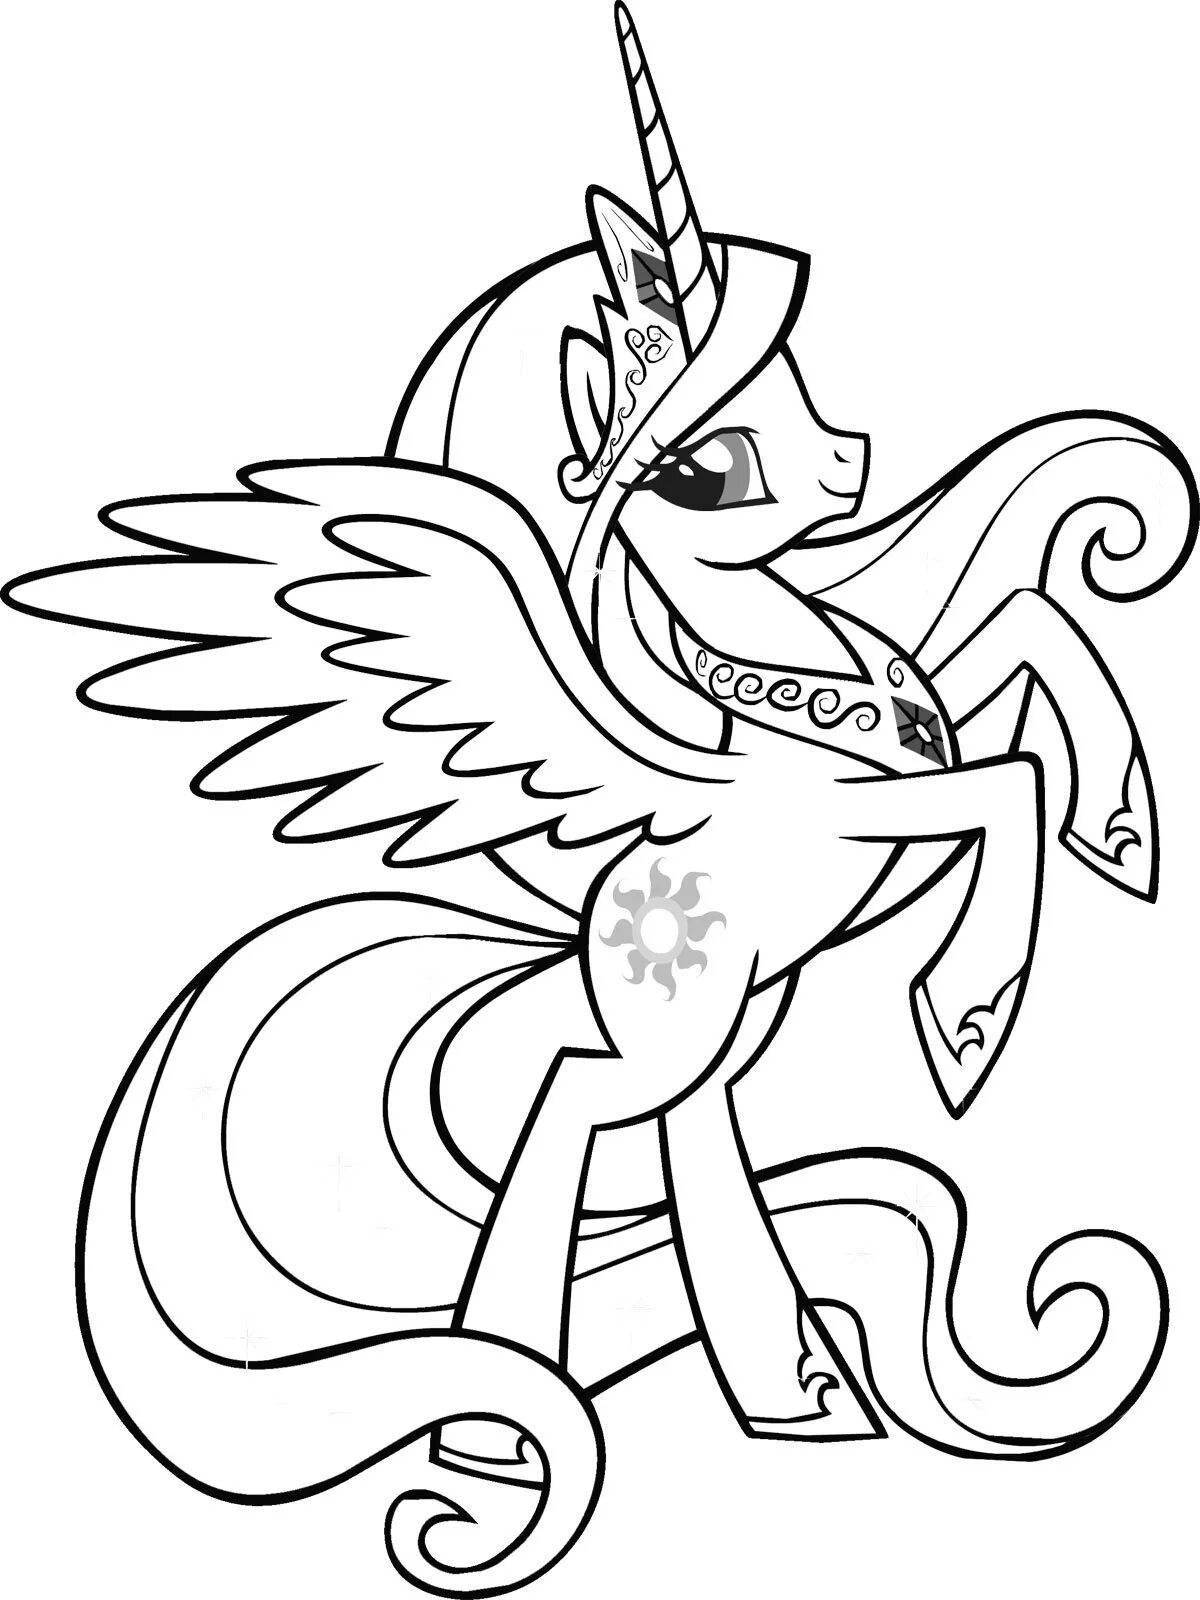 Exquisite little pony coloring book